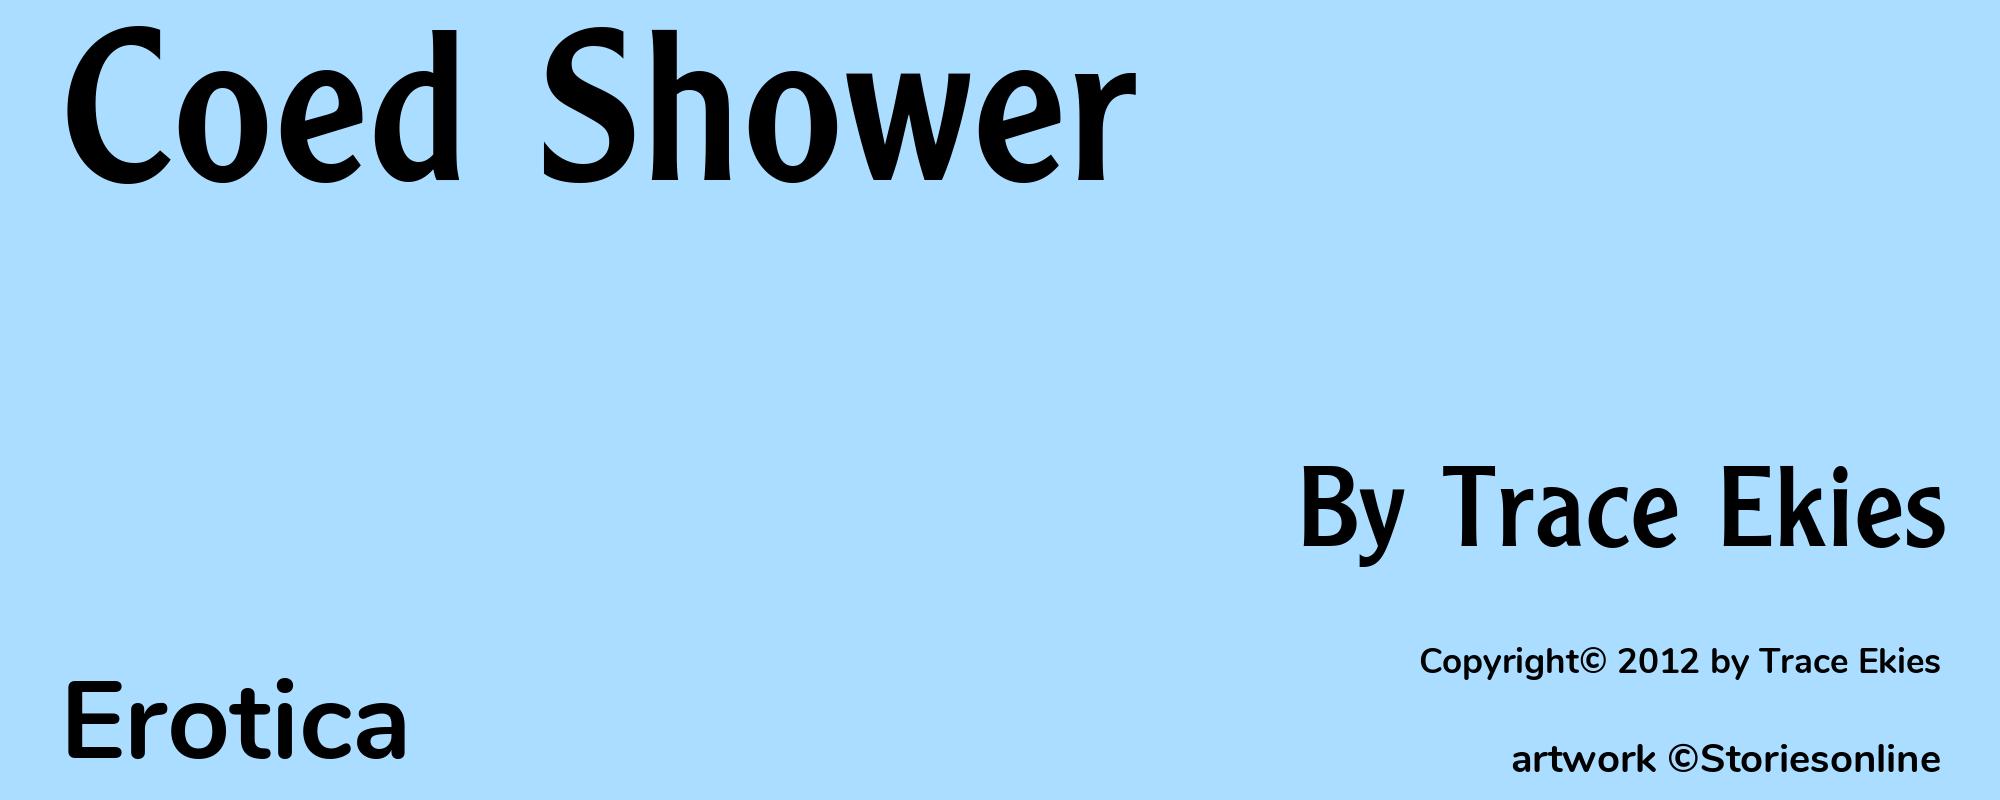 Coed Shower - Cover